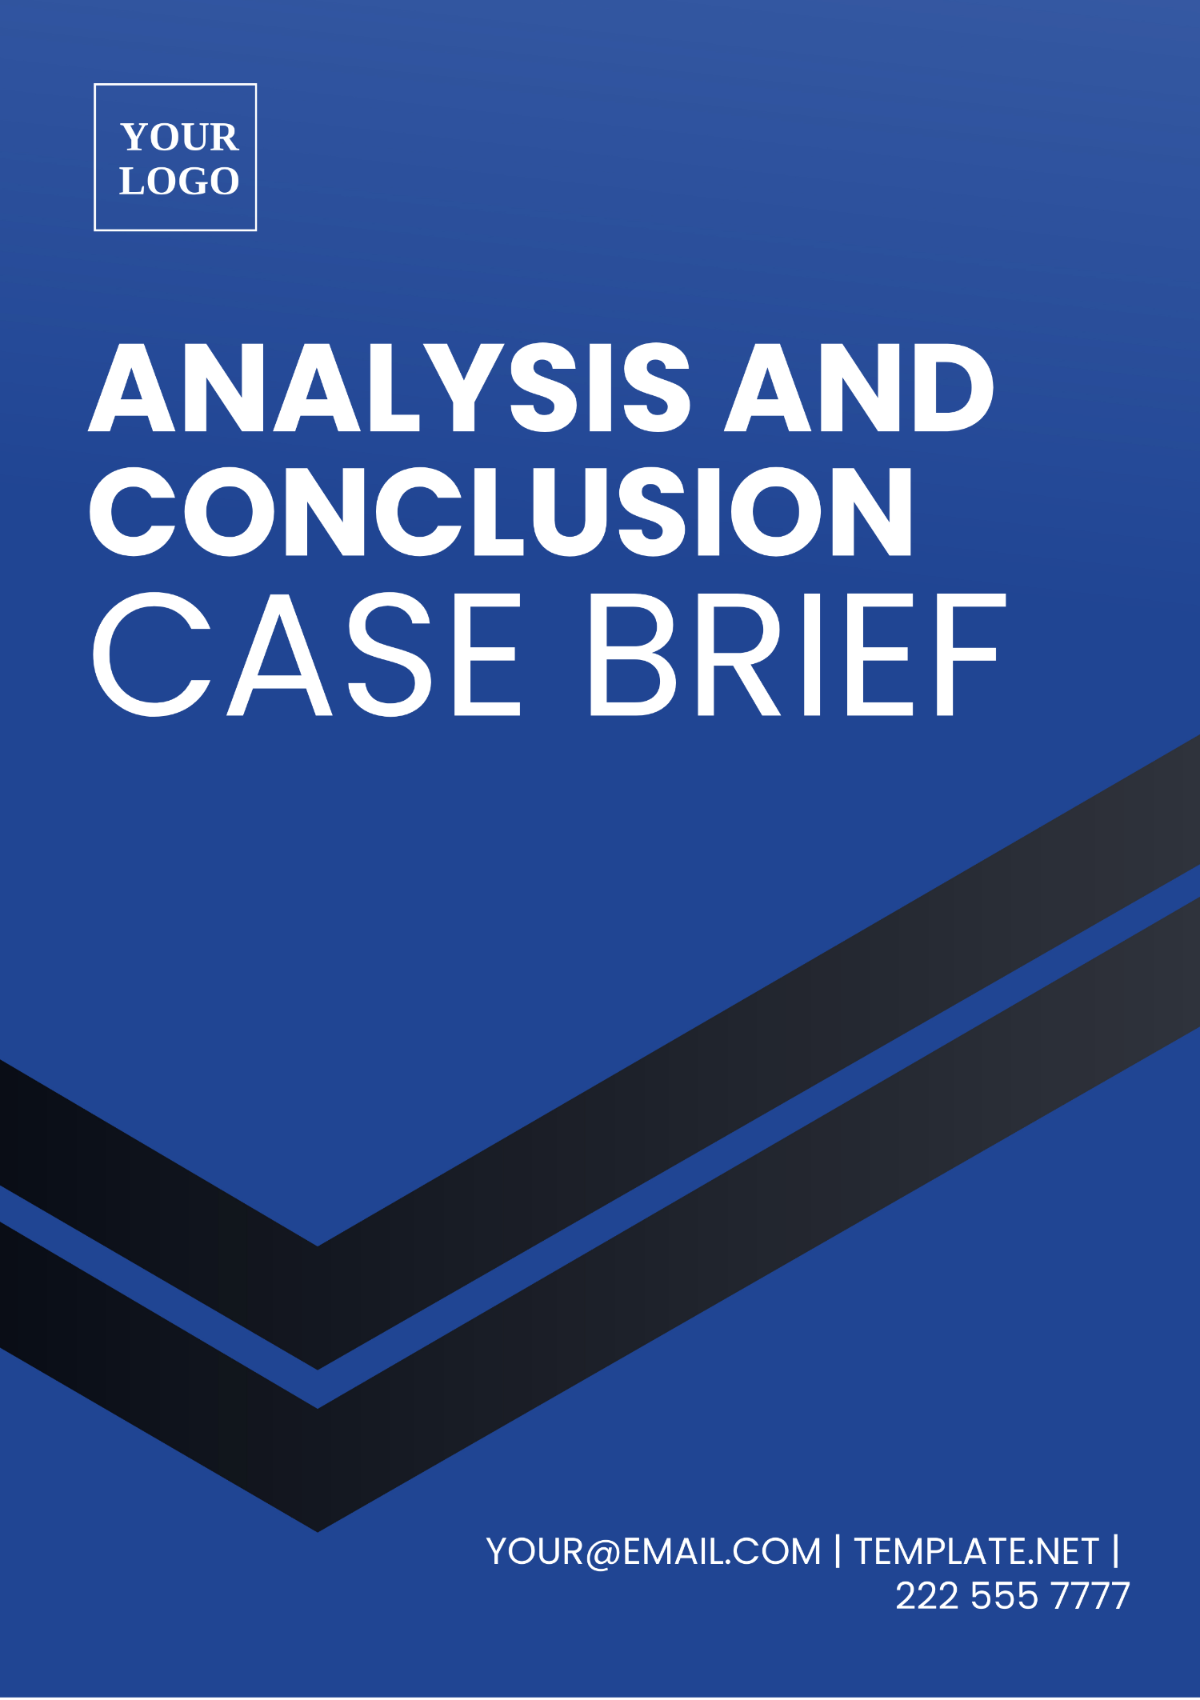 Free Analysis and Conclusion Case Brief Template